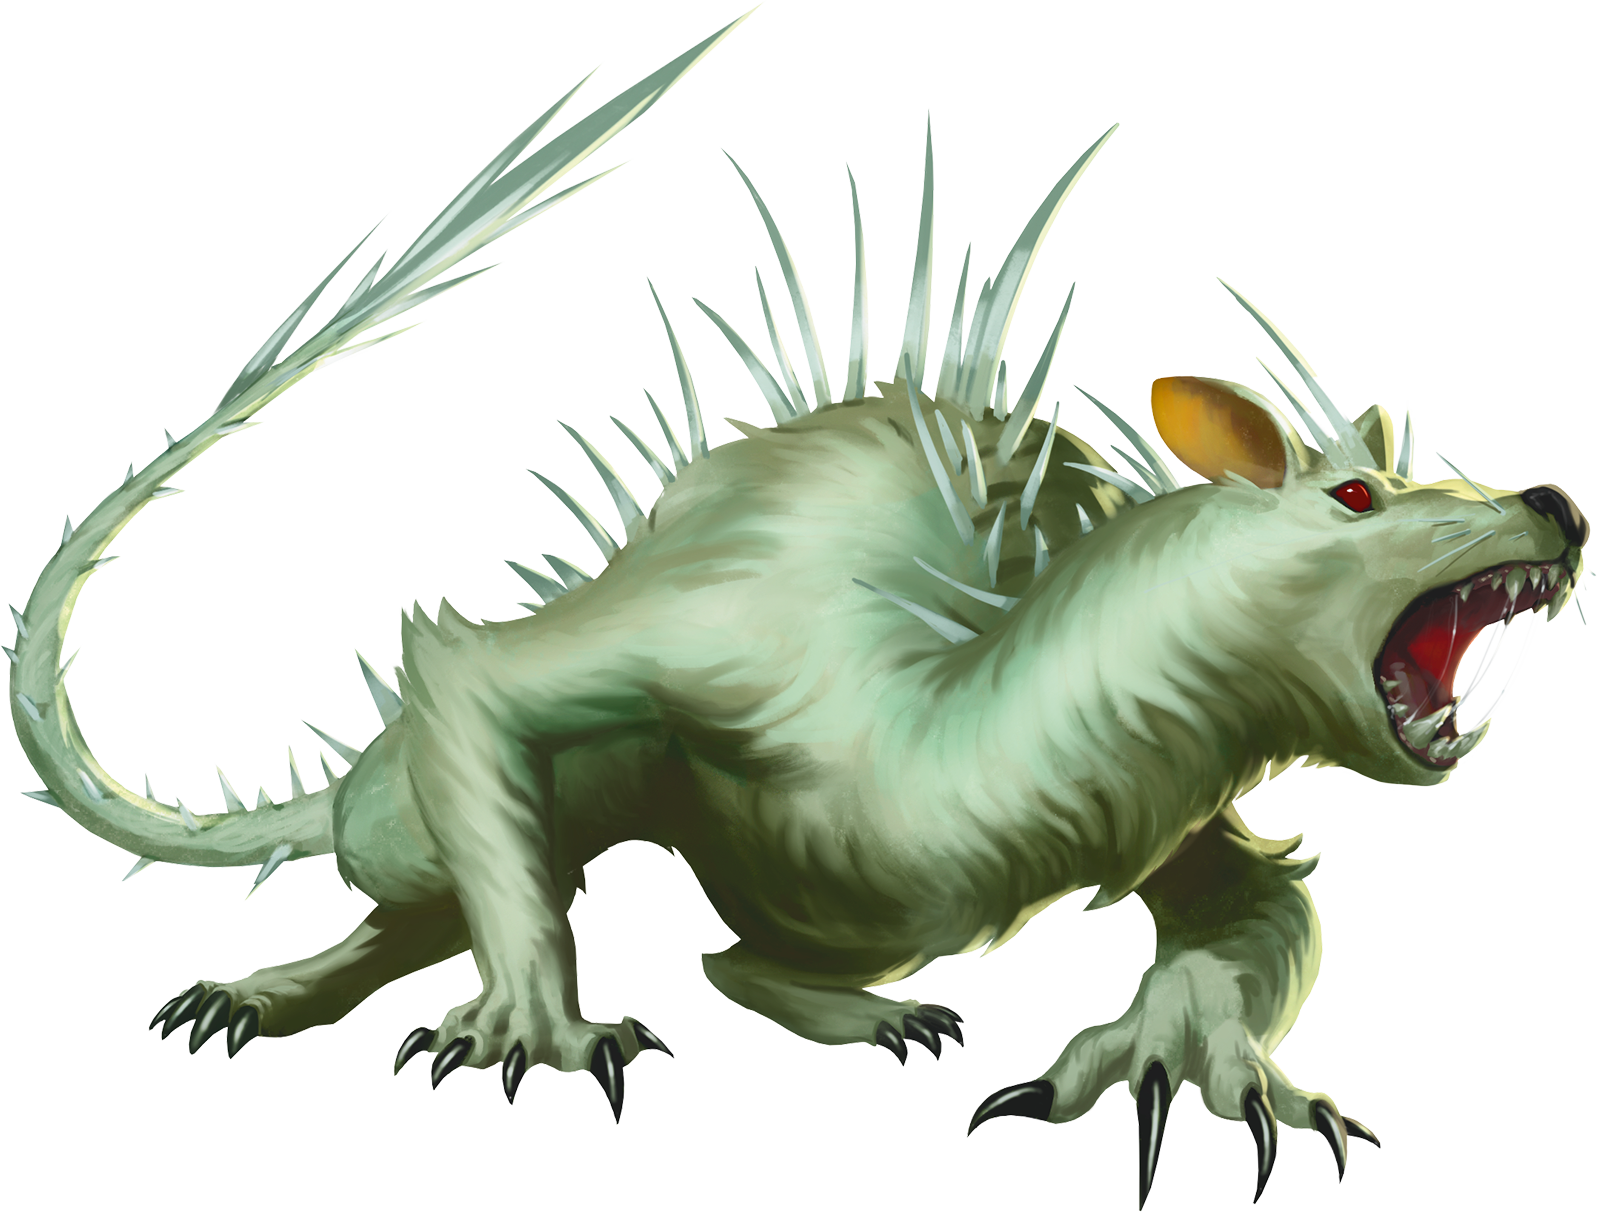 A green, weasel-like, predator with a spiked tail bares its teeth.